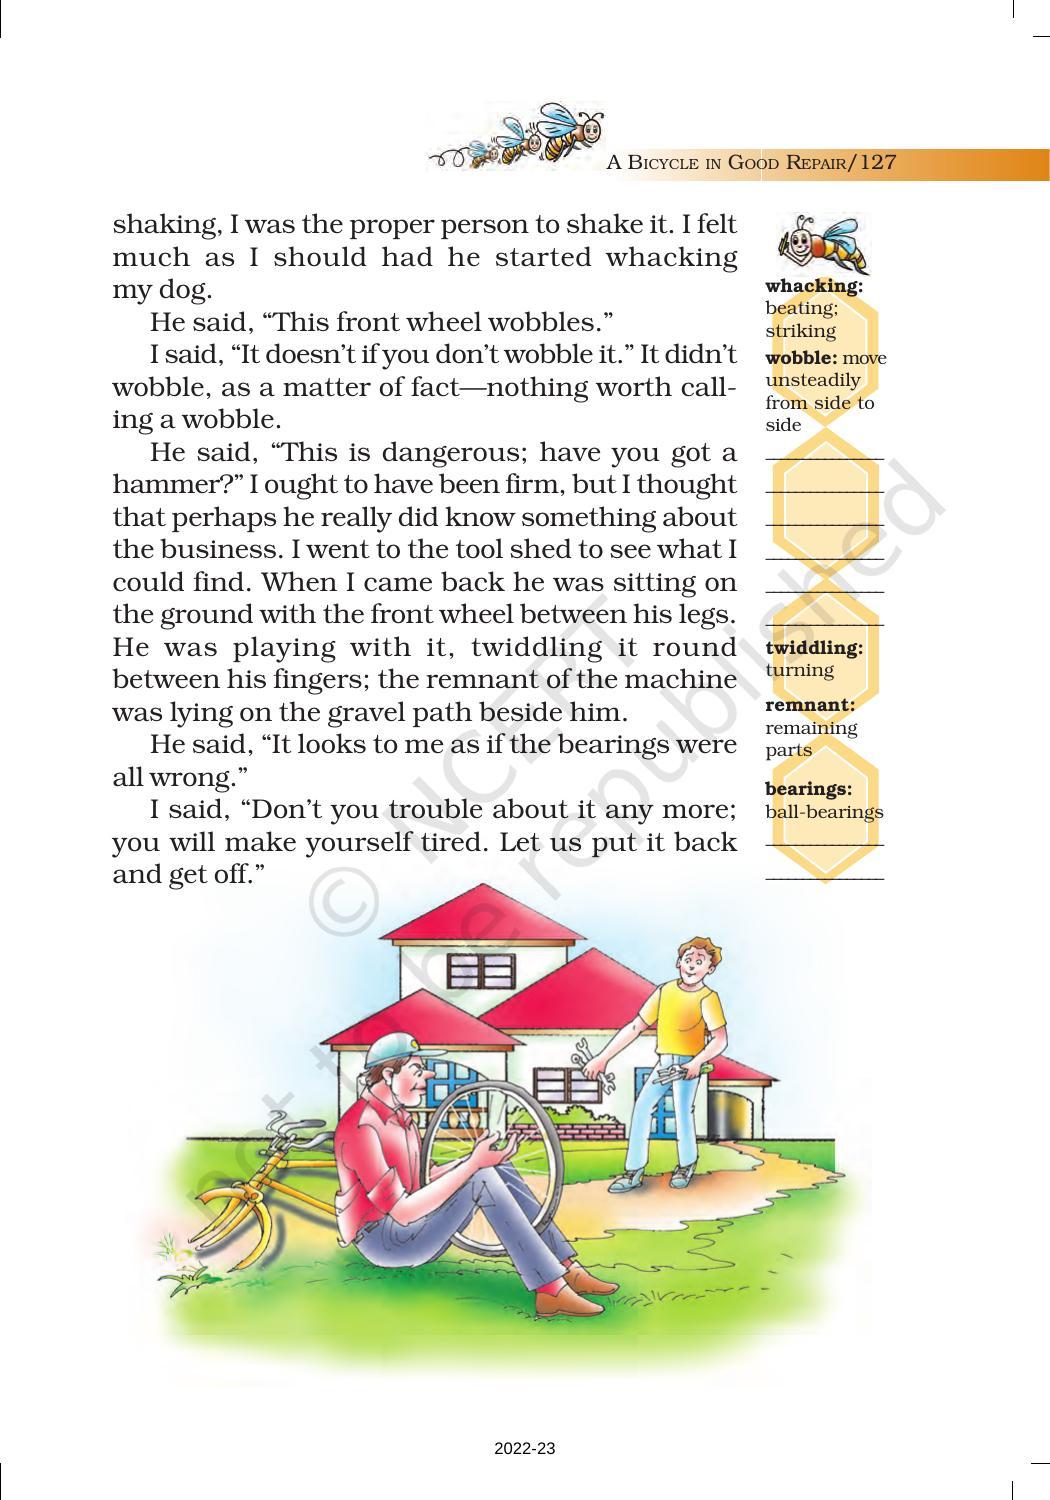 NCERT Book for Class 7 English (Honeycomb): Chapter 9-A Bicycle in Good Repair - Page 2